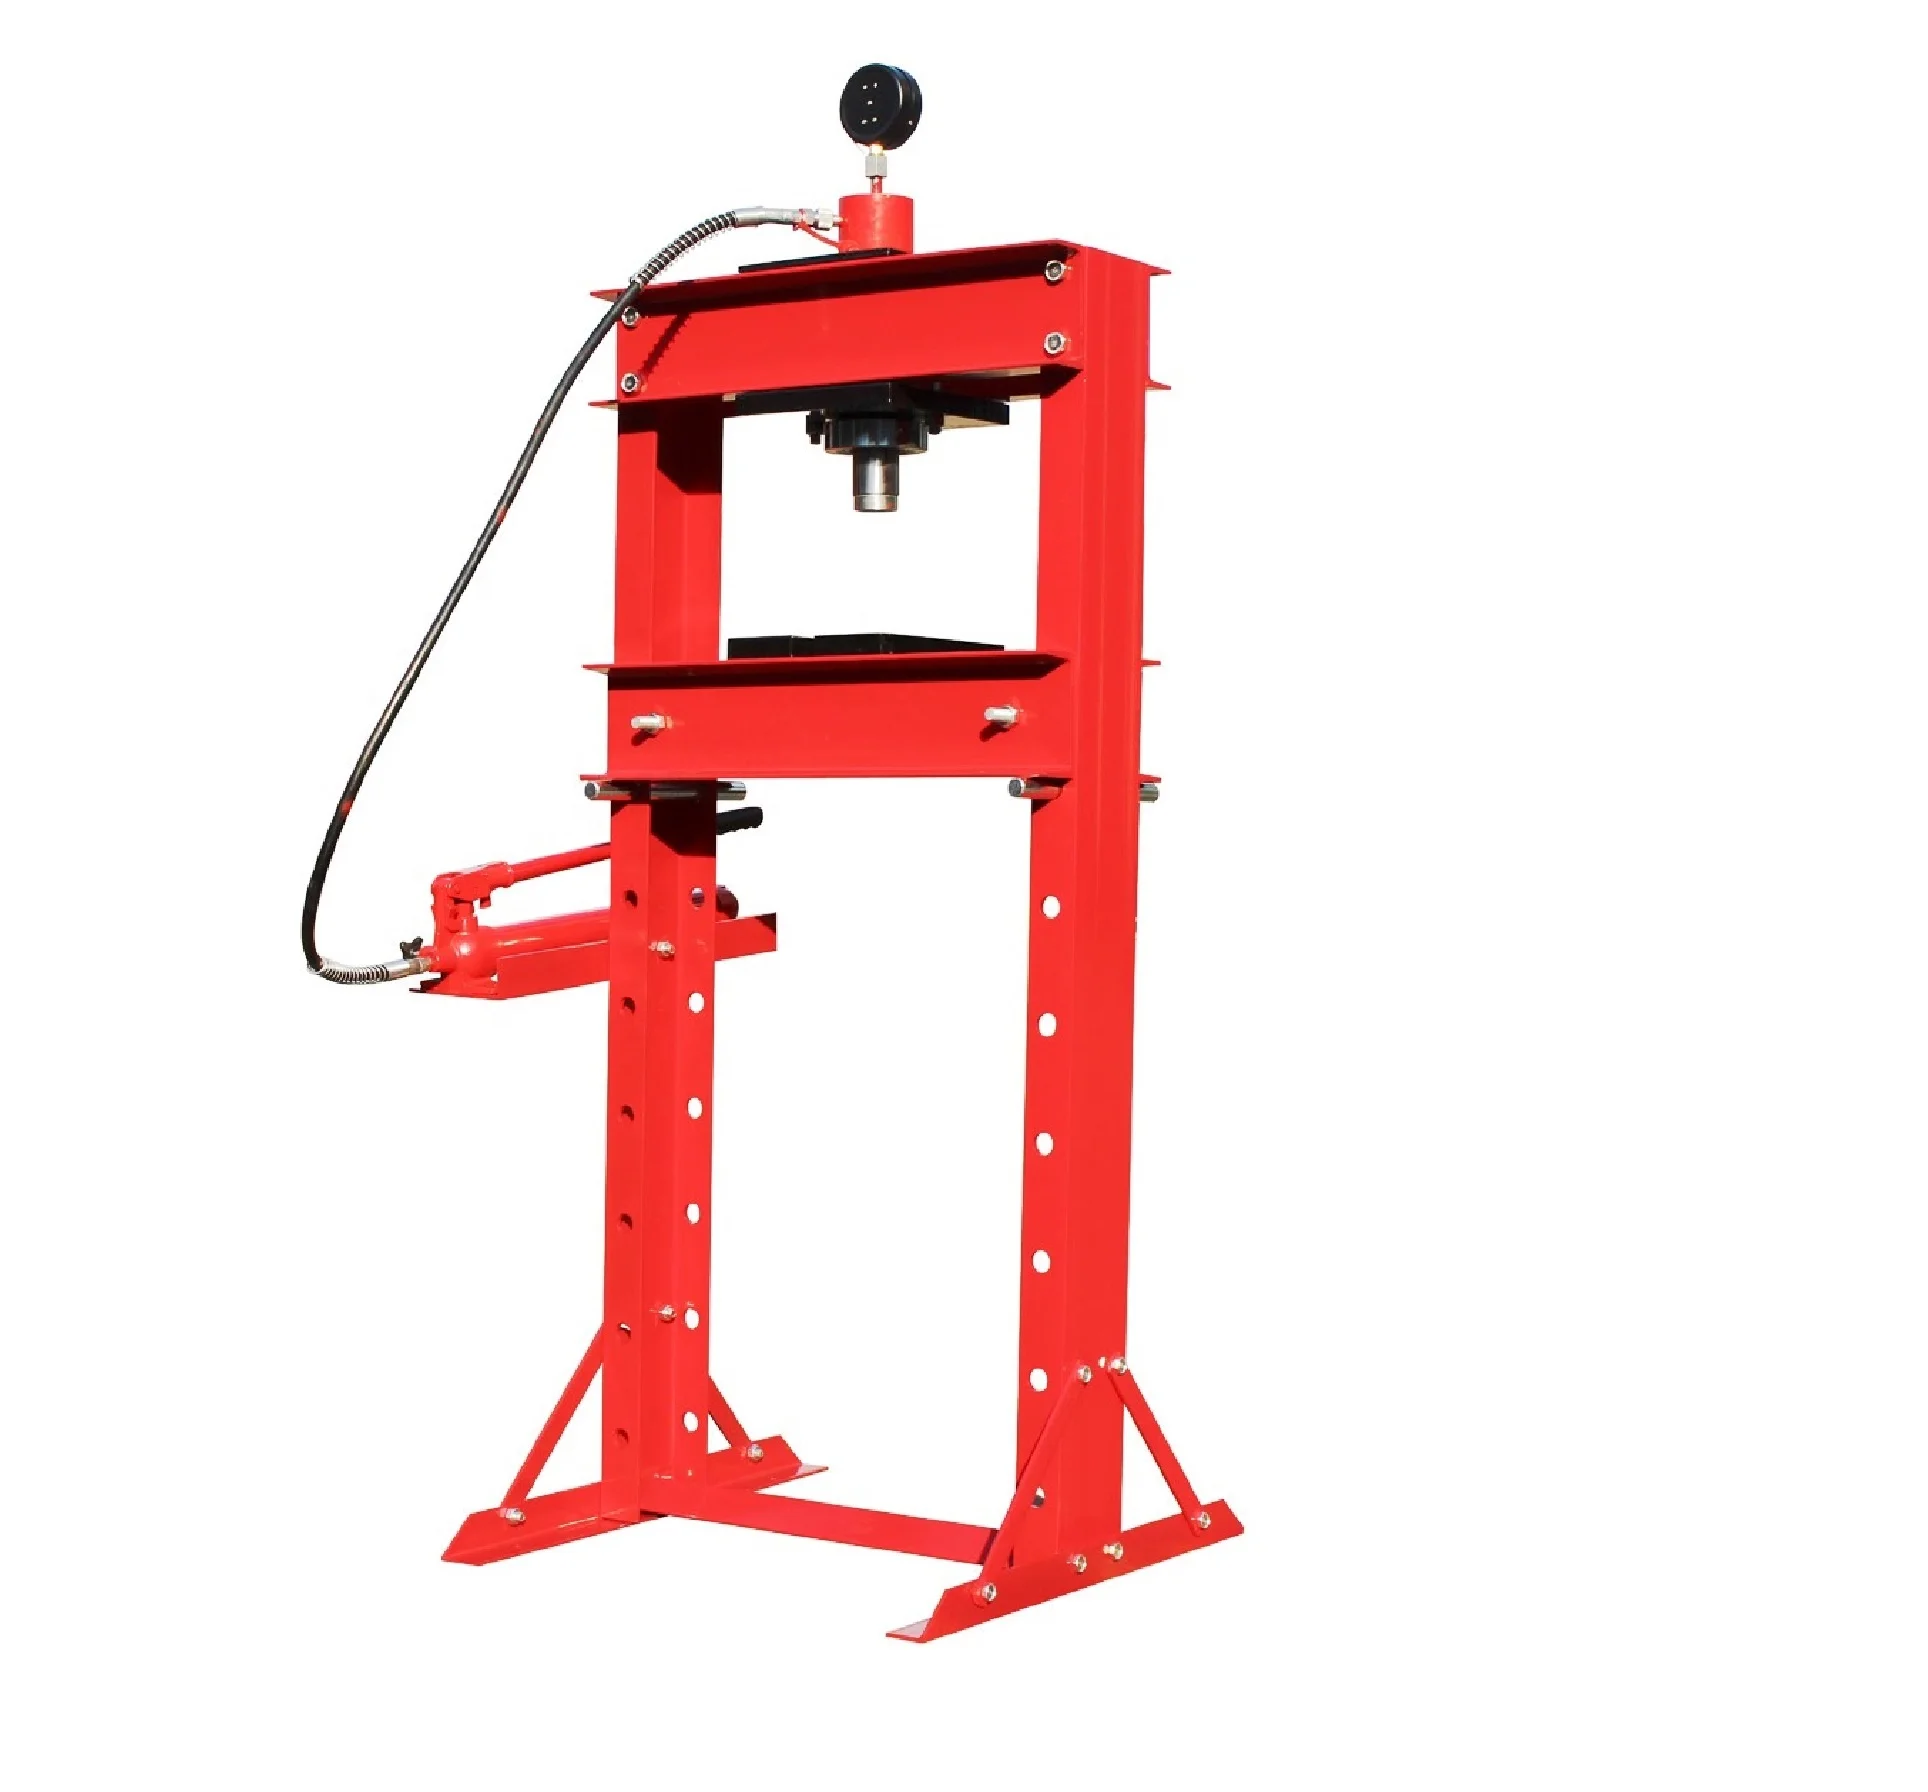 
12 Ton Hot Selling Professional Red Hydraulic Shop Press With Hand Pump 